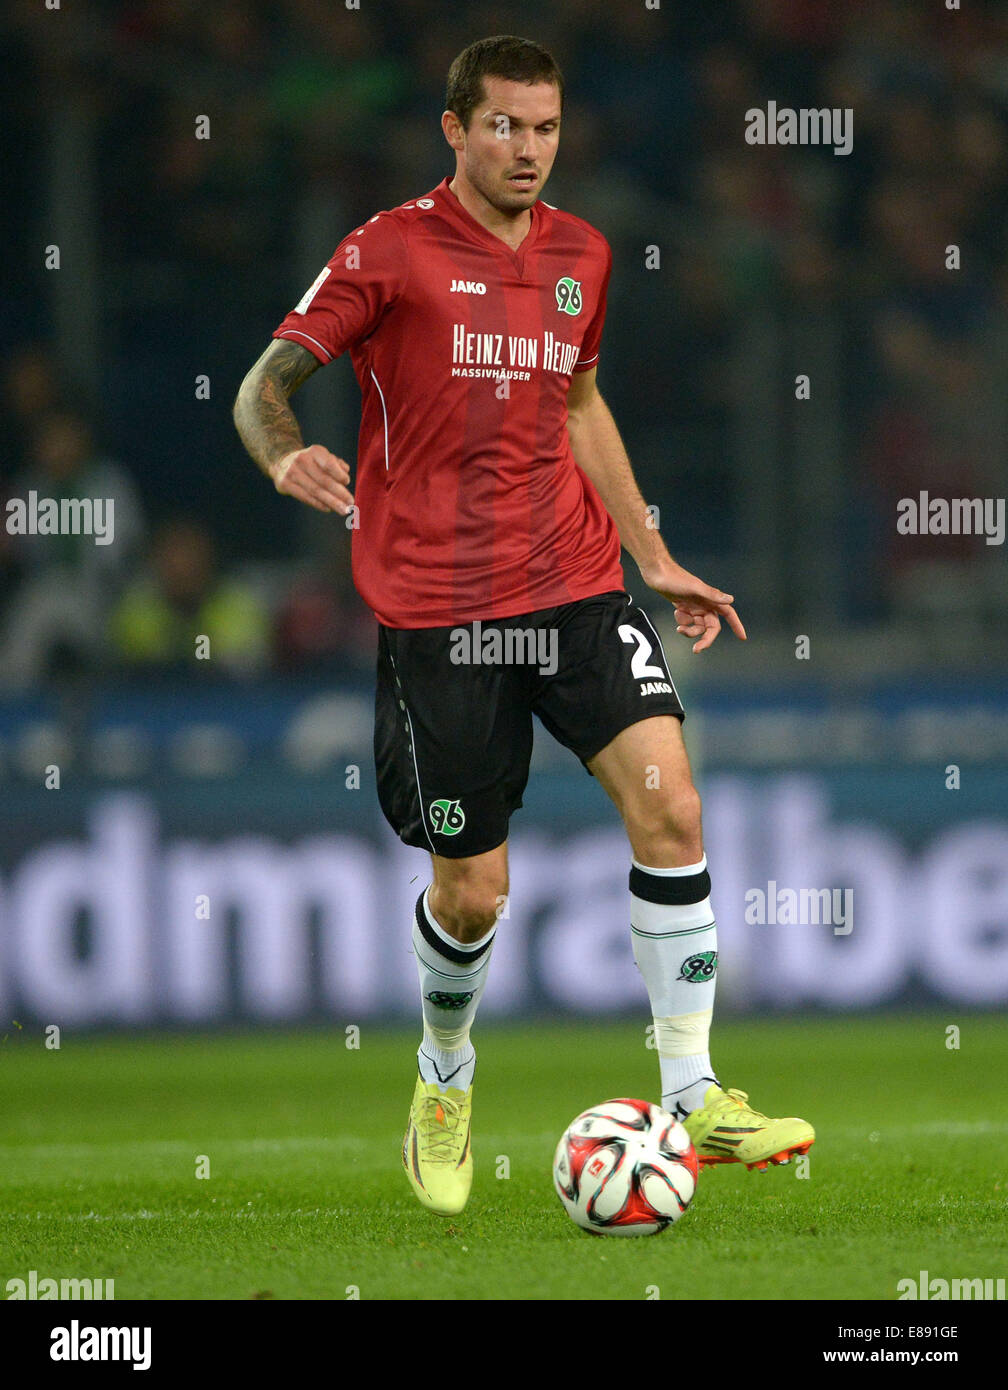 Hannover's Leon Andreasen controls the ball at the Bundesliga game between Hannover 96 and FC Koln in the HDI Arena in Hanover, Germany, 24 September, 2014. Photo: Peter Steffen/dpa Stock Photo